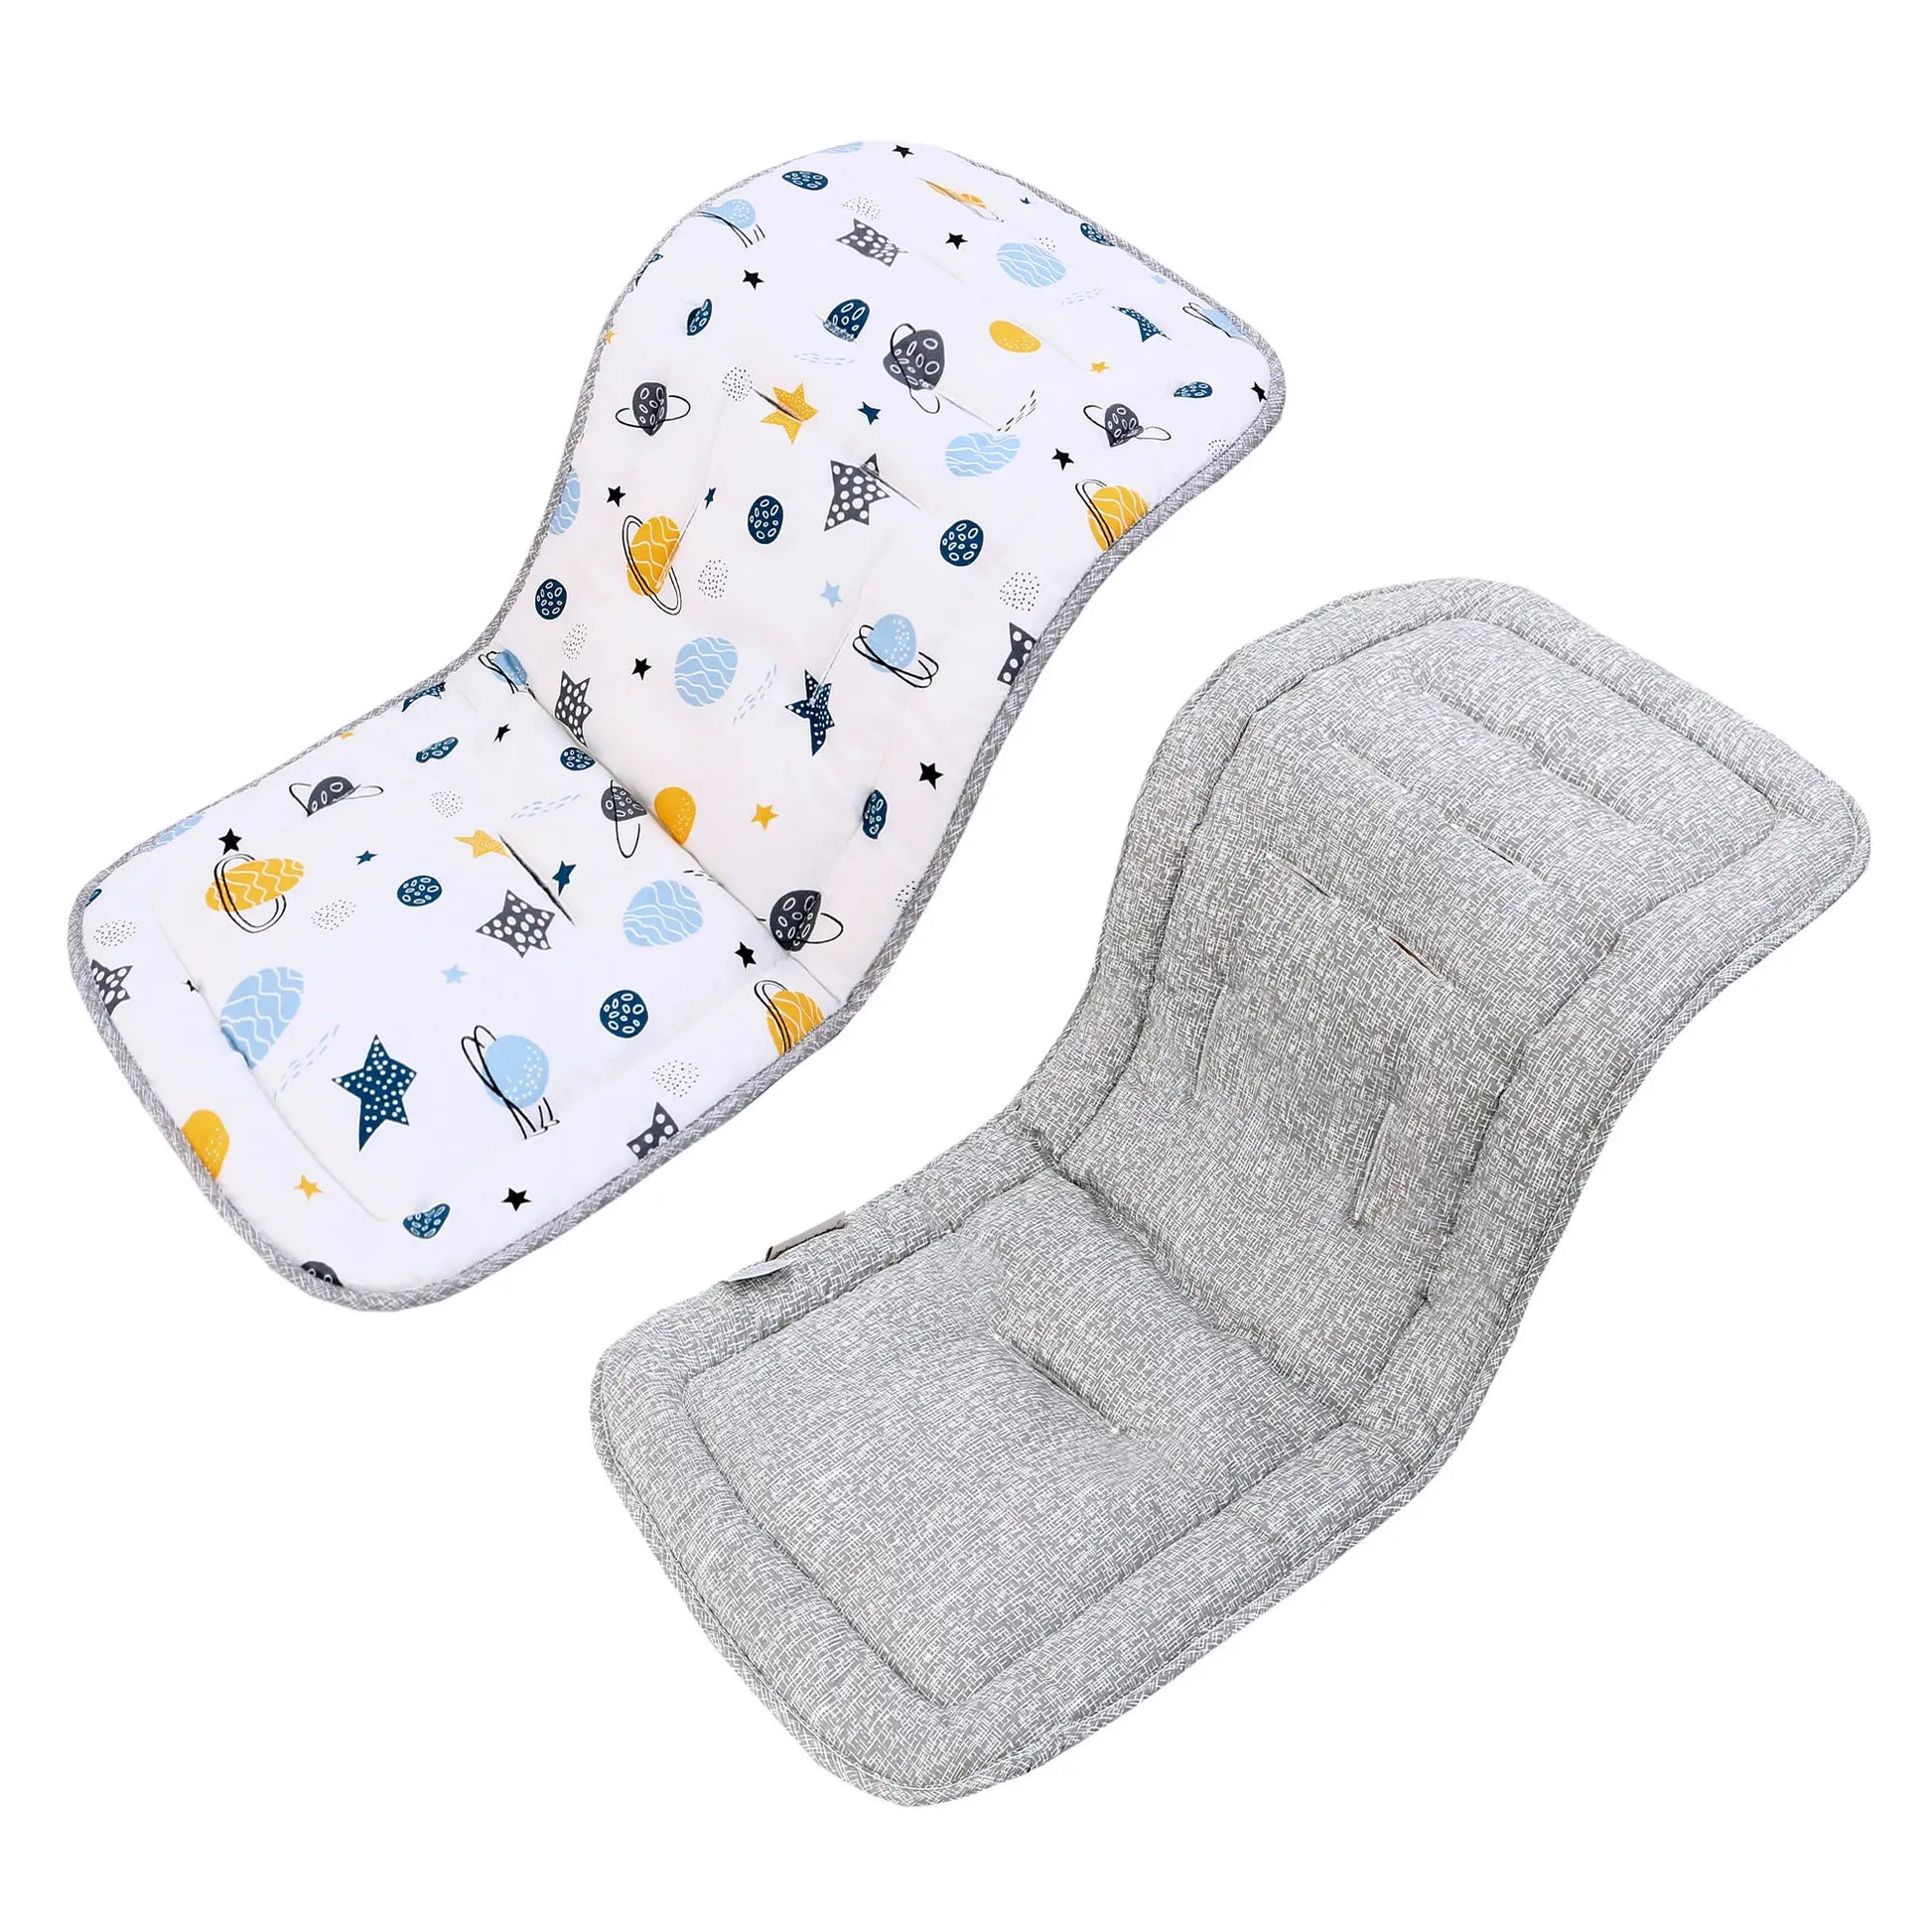 Miracle Baby Stroller Changing Nappy Pad Seat